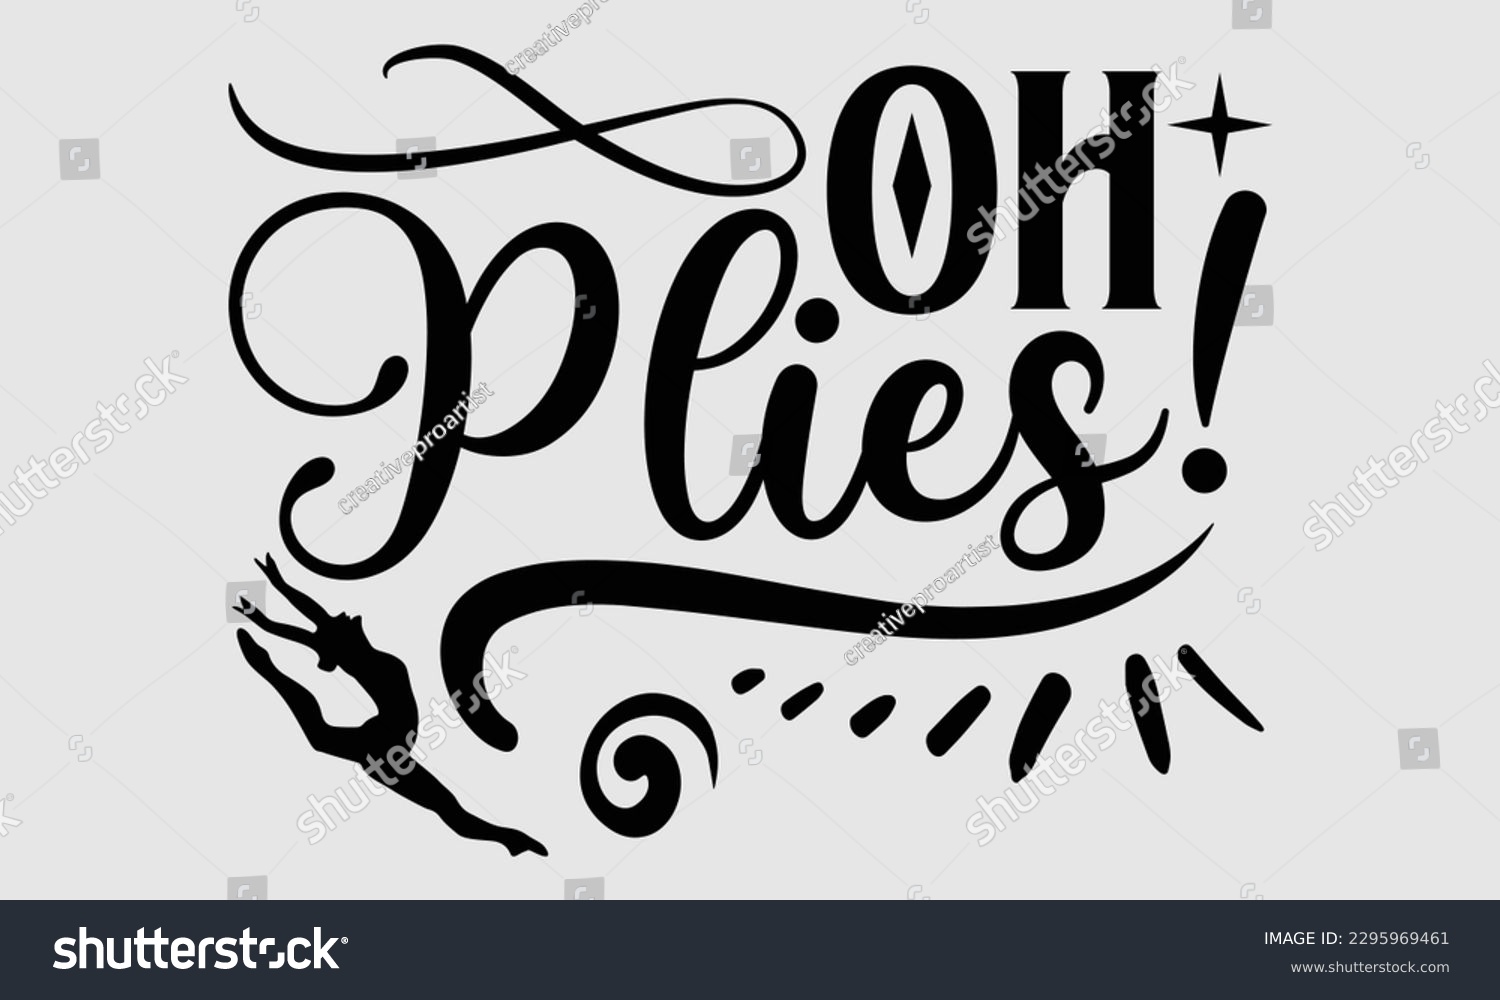 SVG of Oh plies!- Dances SVG design, Hand drawn lettering phrase, This illustration can be used as a print on t-shirts and bags, Vector Template EPS 10 svg